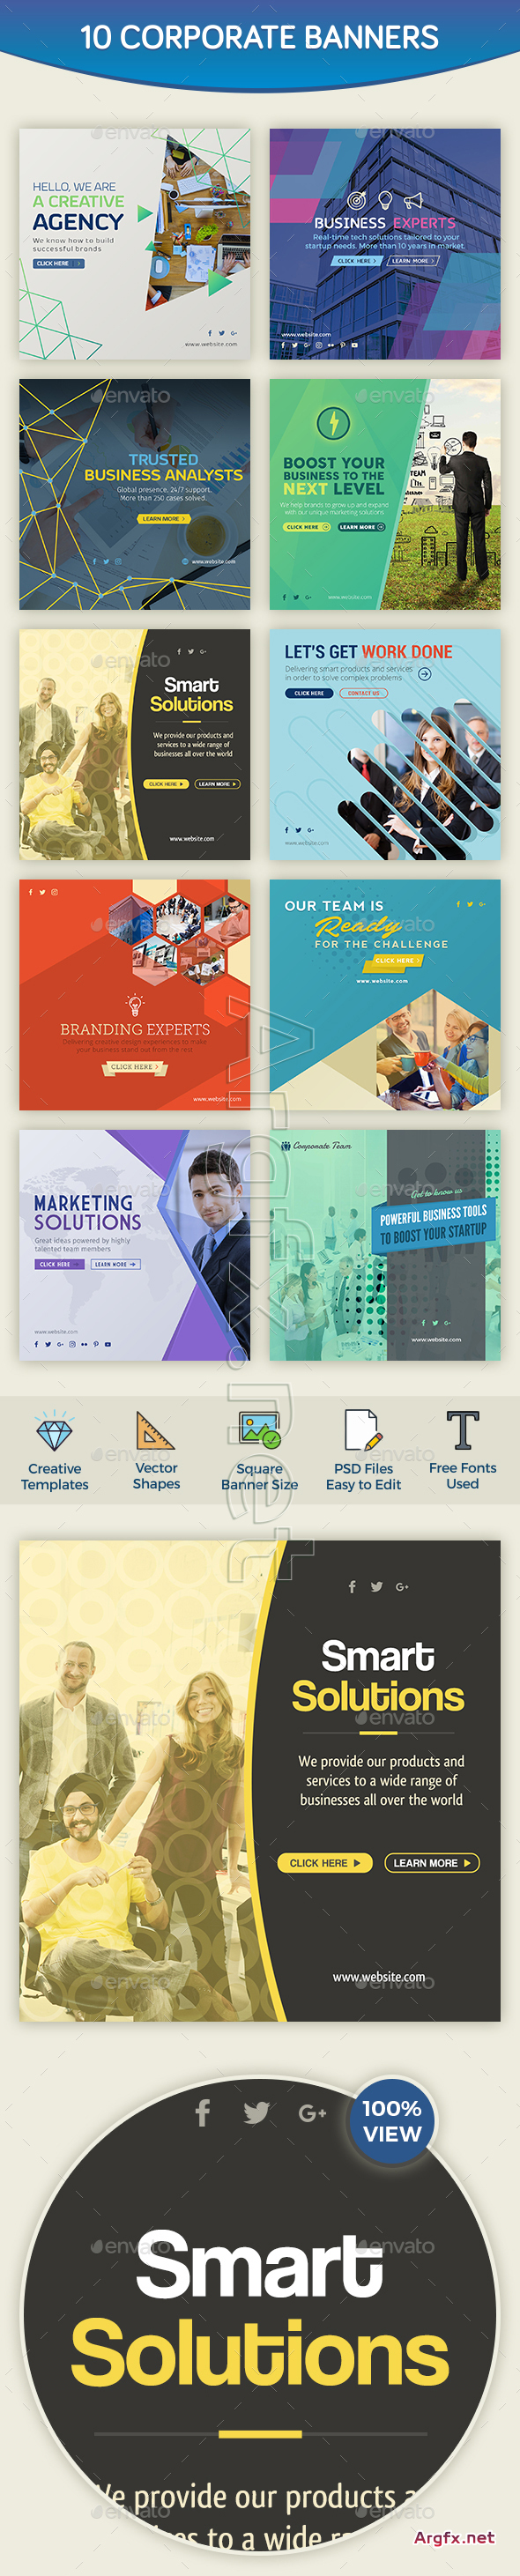  GraphicRiver - Corporate Banners 18934193